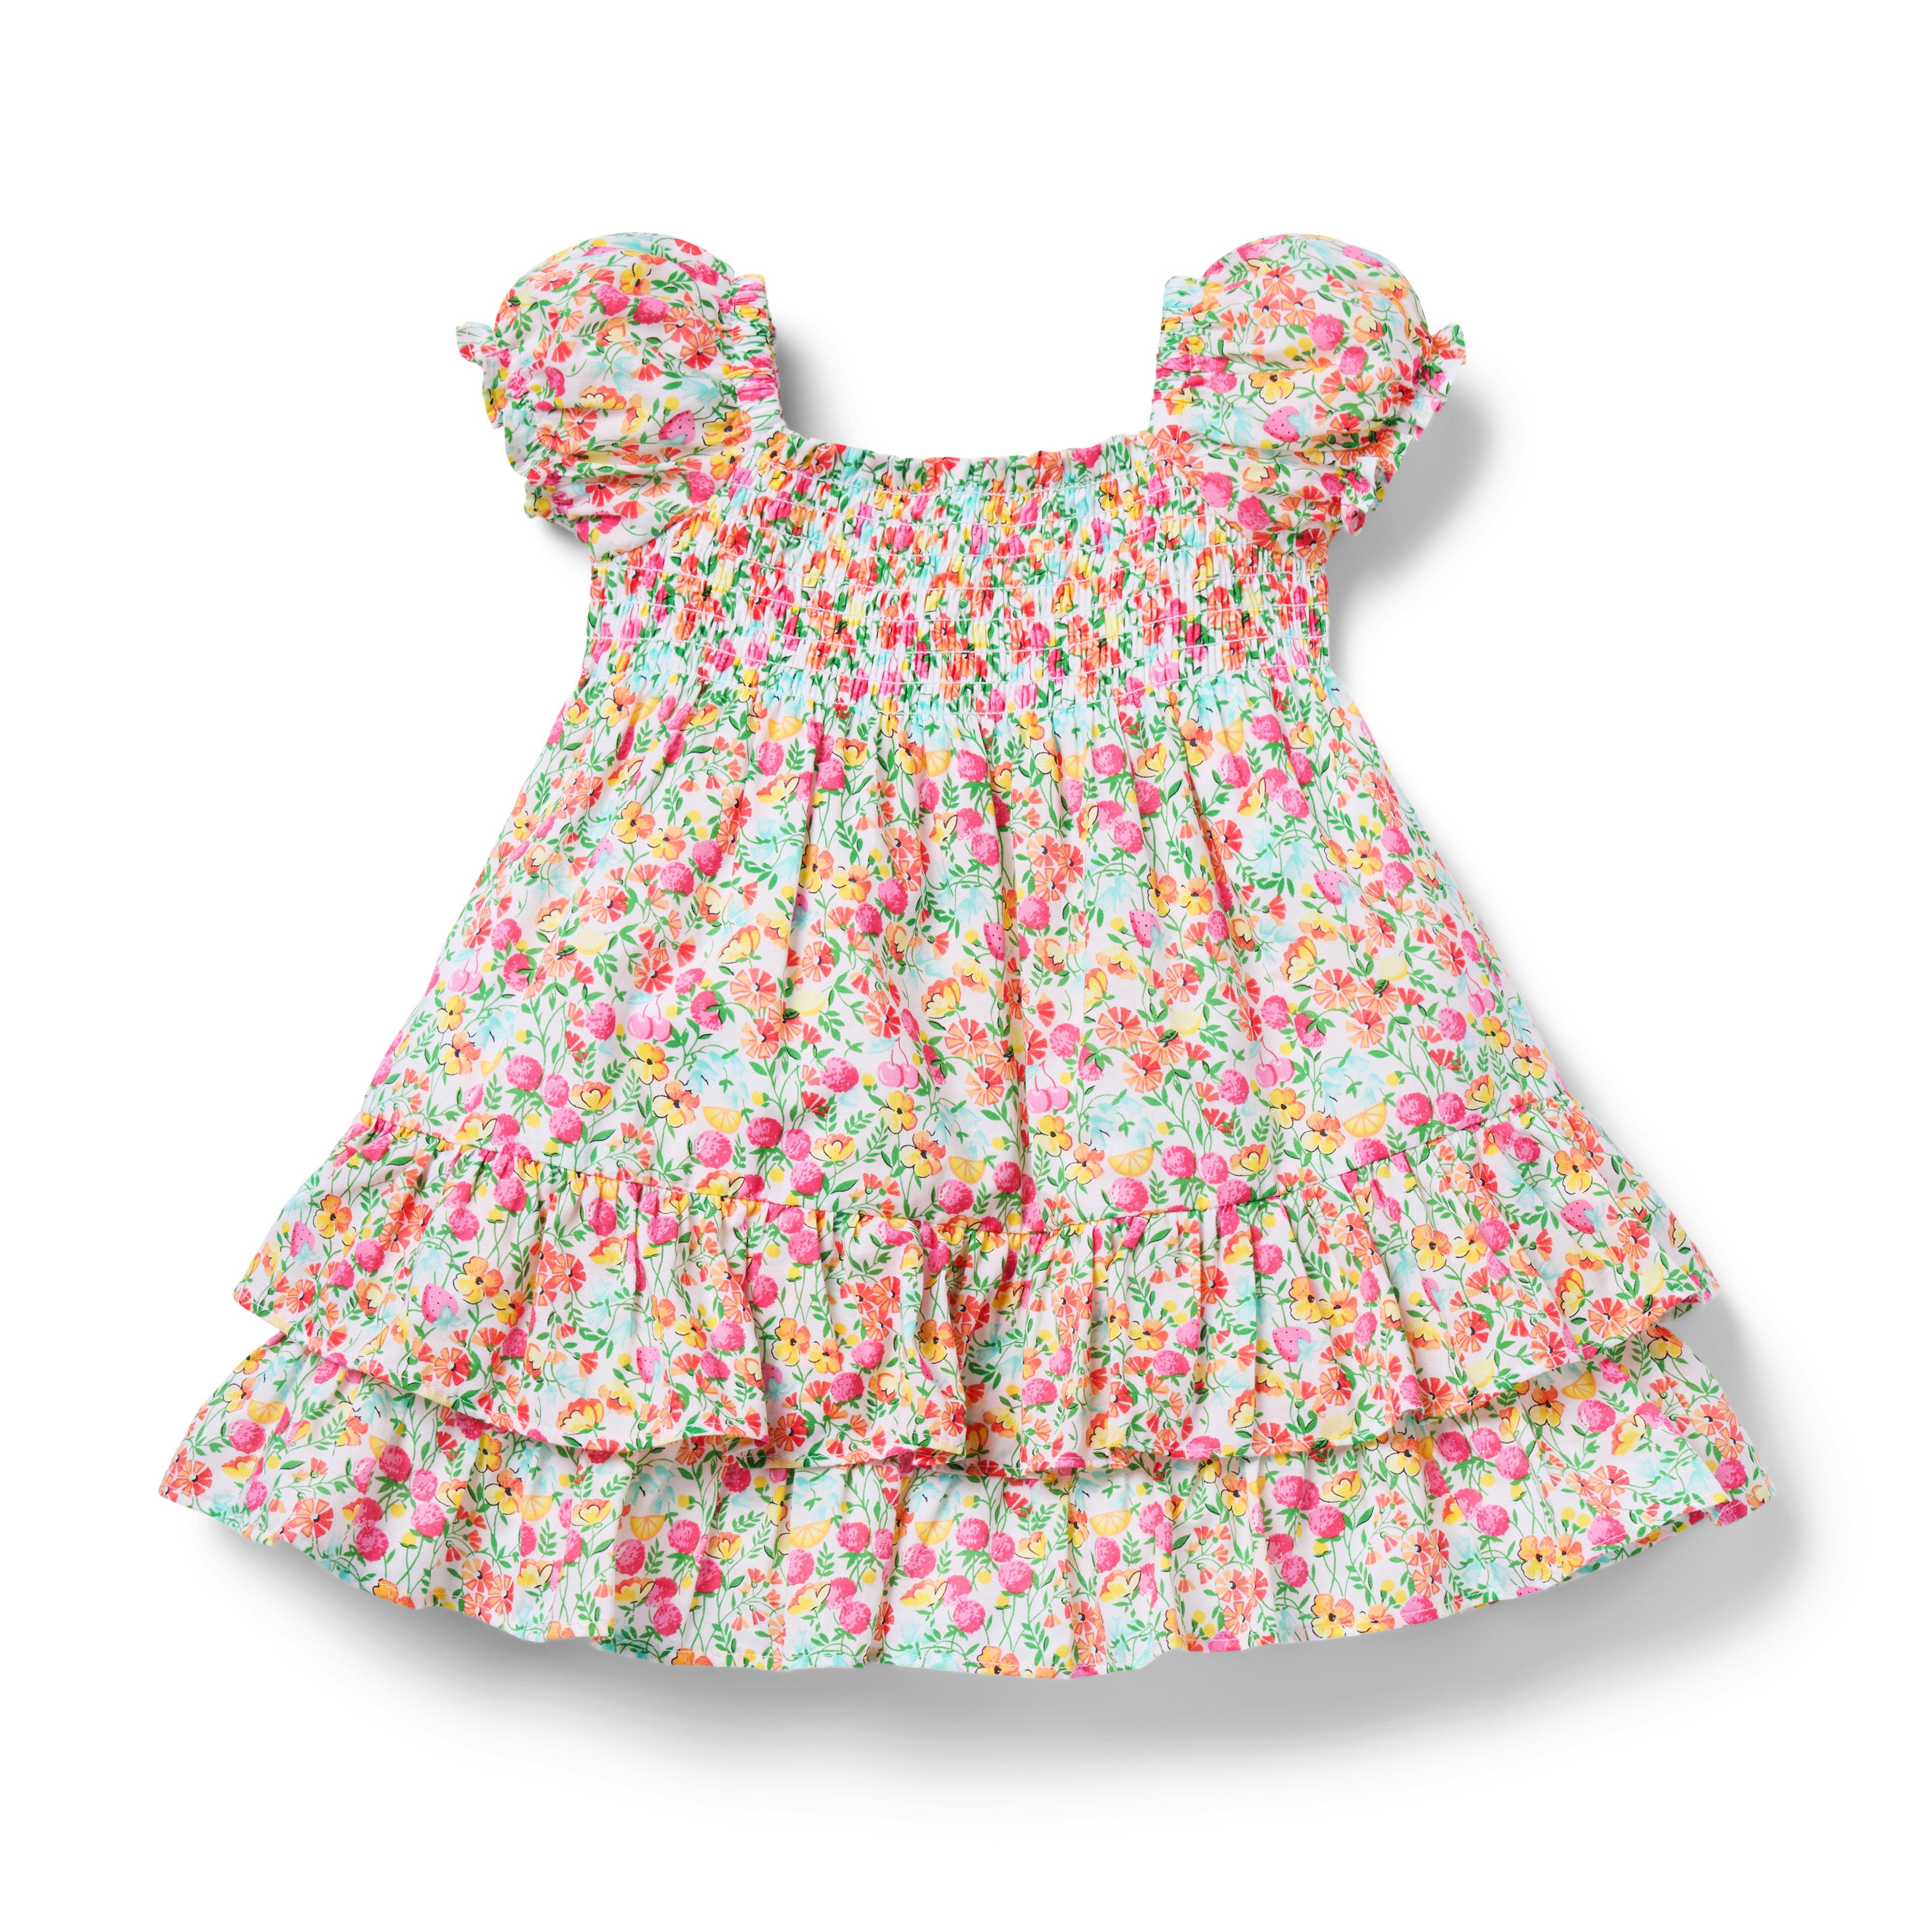 The Abigail Smocked Baby Dress